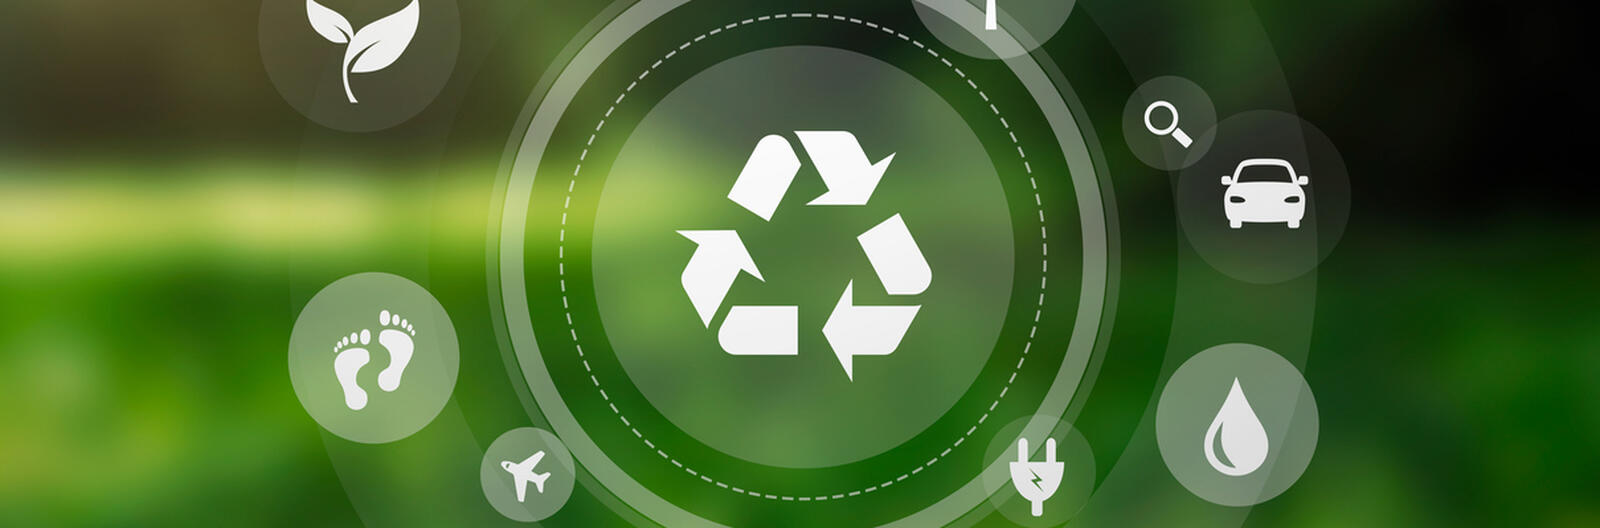 CSL is revolutionising urban waste collection for better sustainability